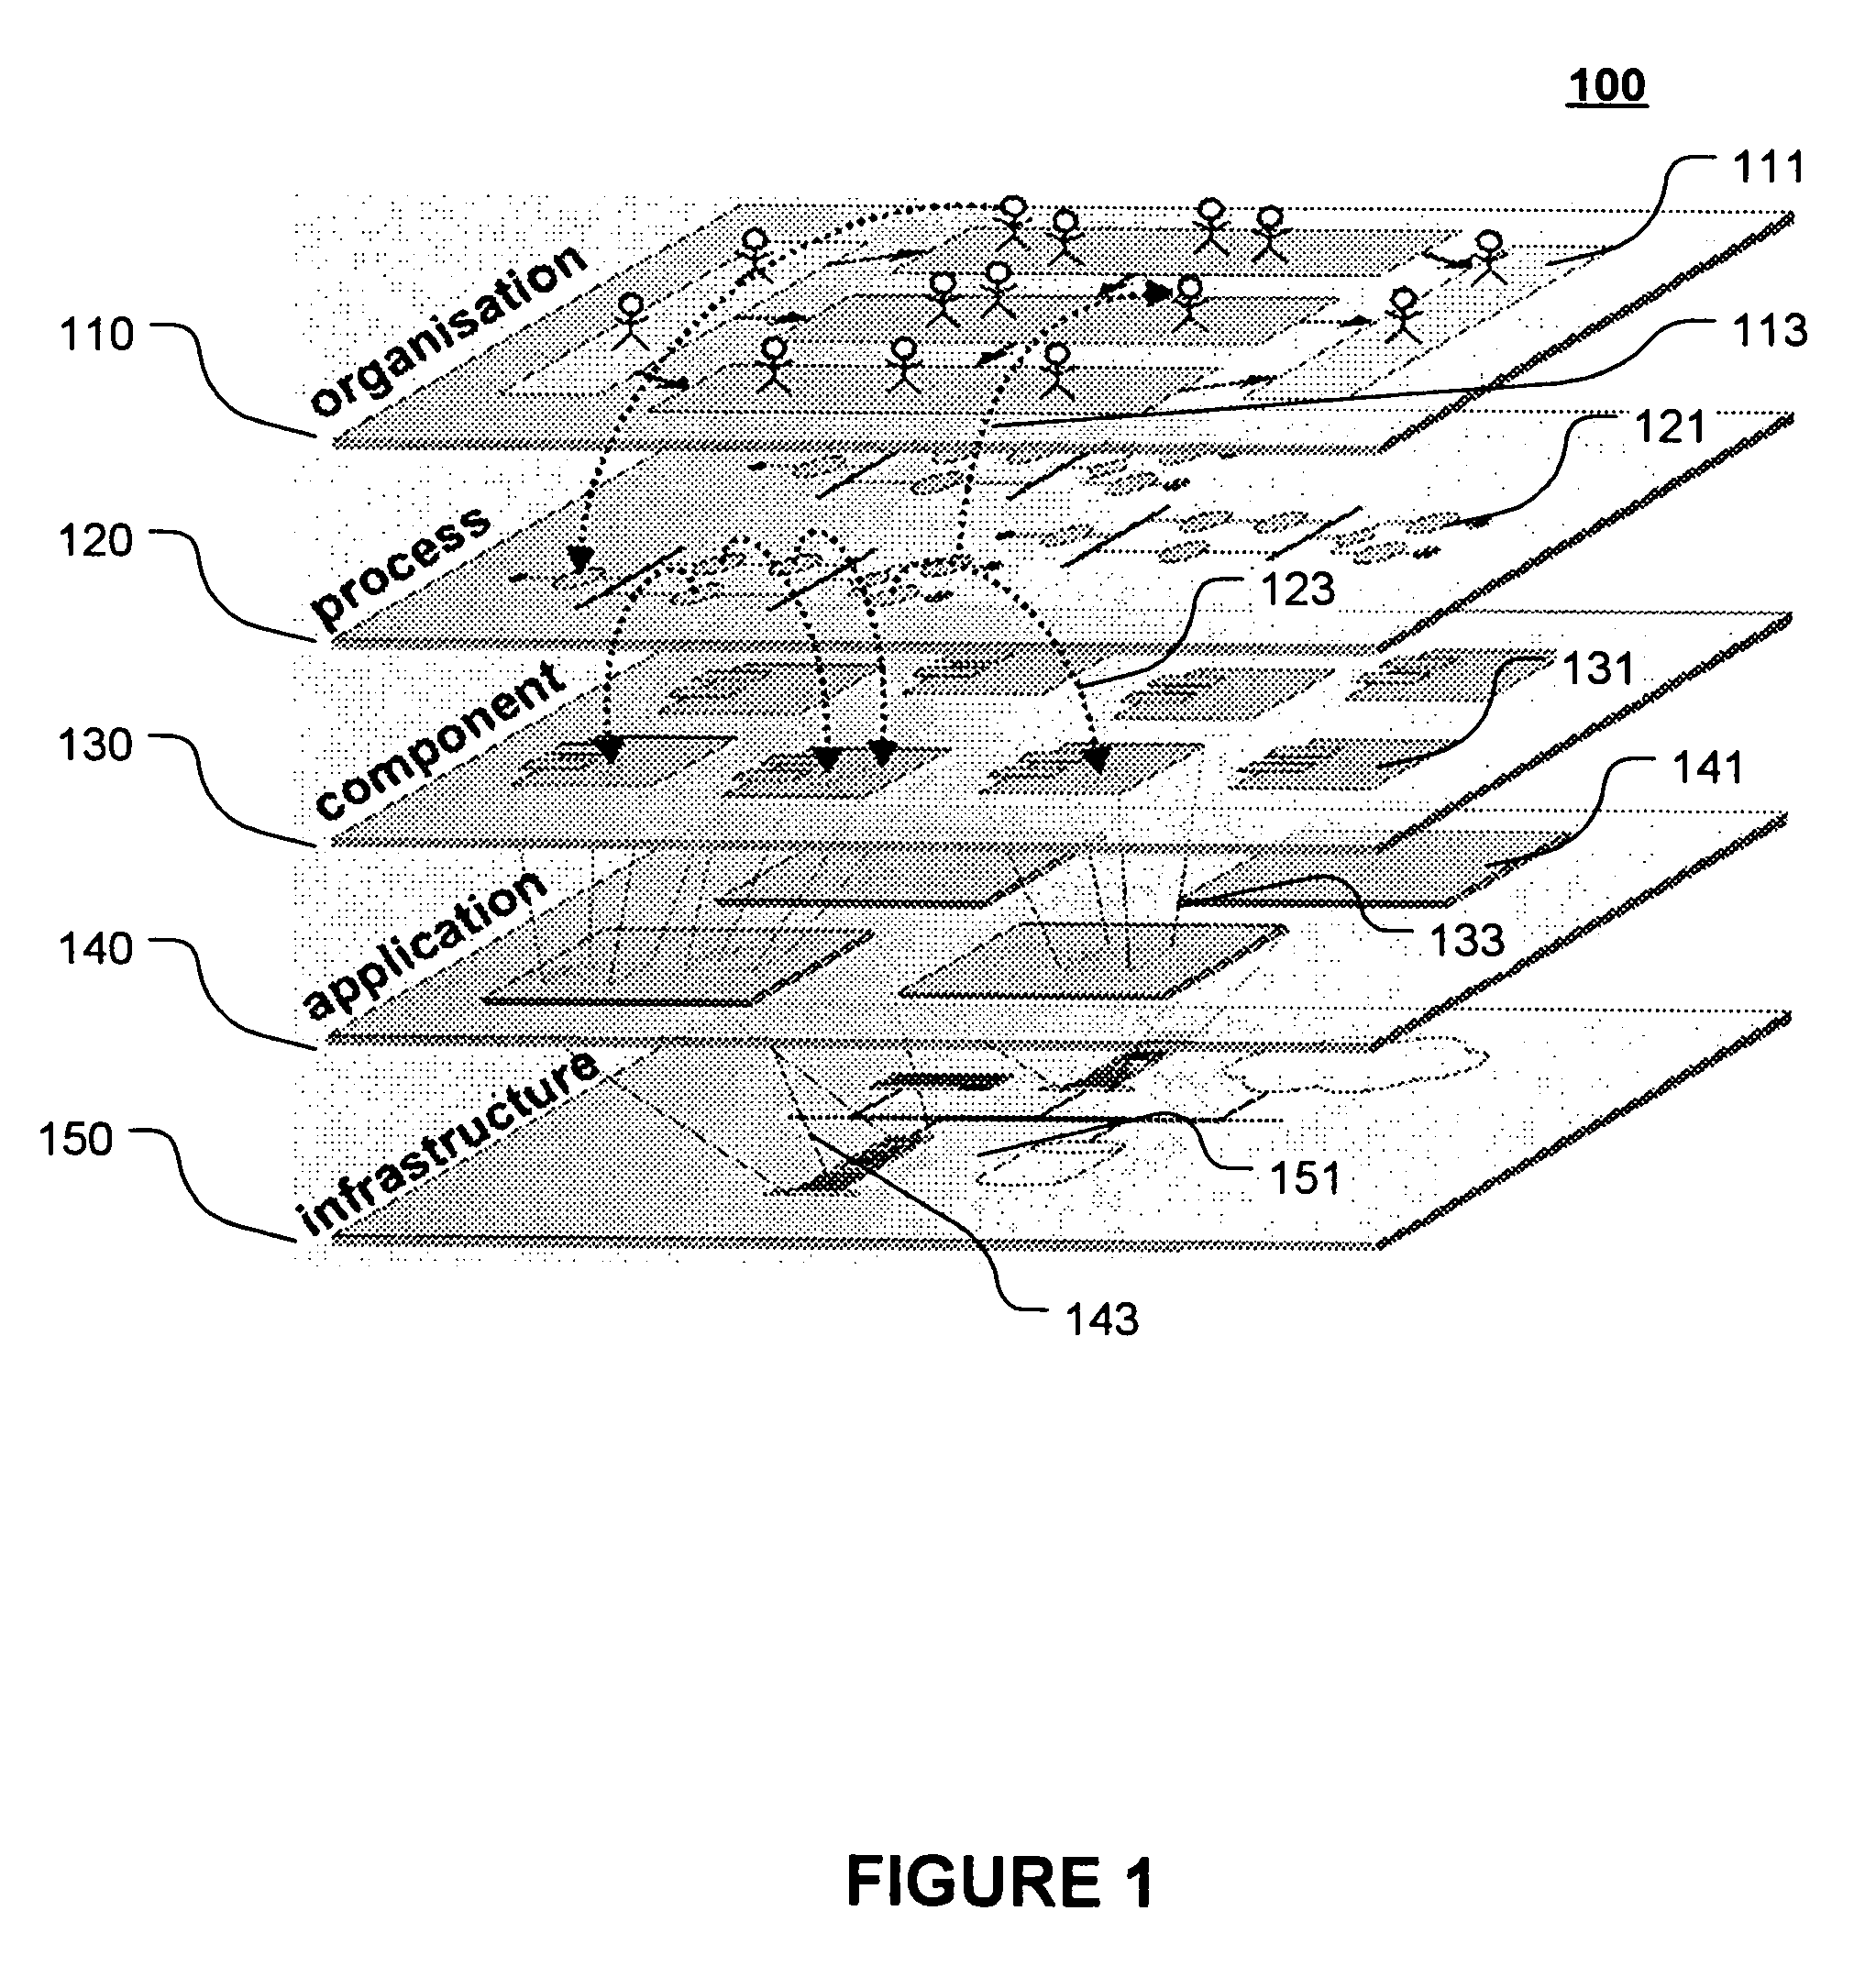 System and method for using blueprints to provide a traceable software solution for an enterprise